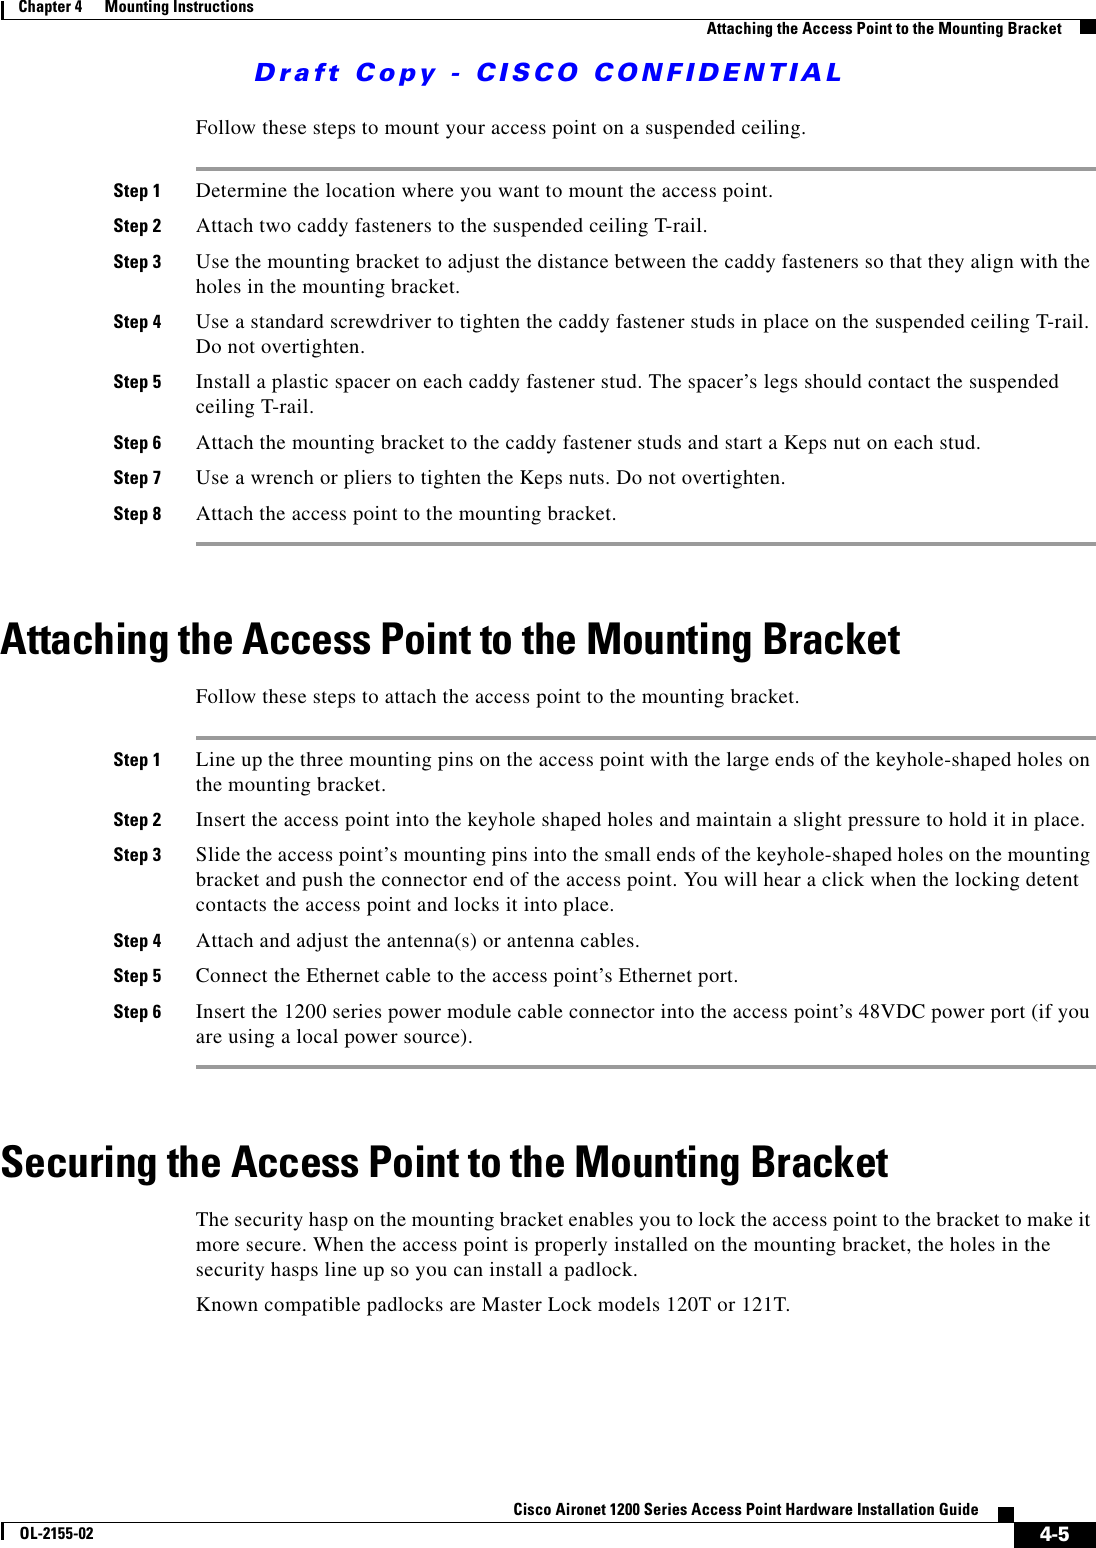 Draft Copy - CISCO CONFIDENTIAL 4-5Cisco Aironet 1200 Series Access Point Hardware Installation GuideOL-2155-02Chapter 4      Mounting InstructionsAttaching the Access Point to the Mounting BracketFollow these steps to mount your access point on a suspended ceiling.Step 1 Determine the location where you want to mount the access point.Step 2 Attach two caddy fasteners to the suspended ceiling T-rail.Step 3 Use the mounting bracket to adjust the distance between the caddy fasteners so that they align with the holes in the mounting bracket.Step 4 Use a standard screwdriver to tighten the caddy fastener studs in place on the suspended ceiling T-rail. Do not overtighten.Step 5 Install a plastic spacer on each caddy fastener stud. The spacer’s legs should contact the suspended ceiling T-rail.Step 6 Attach the mounting bracket to the caddy fastener studs and start a Keps nut on each stud.Step 7 Use a wrench or pliers to tighten the Keps nuts. Do not overtighten.Step 8 Attach the access point to the mounting bracket.Attaching the Access Point to the Mounting BracketFollow these steps to attach the access point to the mounting bracket.Step 1 Line up the three mounting pins on the access point with the large ends of the keyhole-shaped holes on the mounting bracket.Step 2 Insert the access point into the keyhole shaped holes and maintain a slight pressure to hold it in place.Step 3 Slide the access point’s mounting pins into the small ends of the keyhole-shaped holes on the mounting bracket and push the connector end of the access point. You will hear a click when the locking detent contacts the access point and locks it into place.Step 4 Attach and adjust the antenna(s) or antenna cables.Step 5 Connect the Ethernet cable to the access point’s Ethernet port.Step 6 Insert the 1200 series power module cable connector into the access point’s 48VDC power port (if you are using a local power source).Securing the Access Point to the Mounting BracketThe security hasp on the mounting bracket enables you to lock the access point to the bracket to make it more secure. When the access point is properly installed on the mounting bracket, the holes in the security hasps line up so you can install a padlock.Known compatible padlocks are Master Lock models 120T or 121T.